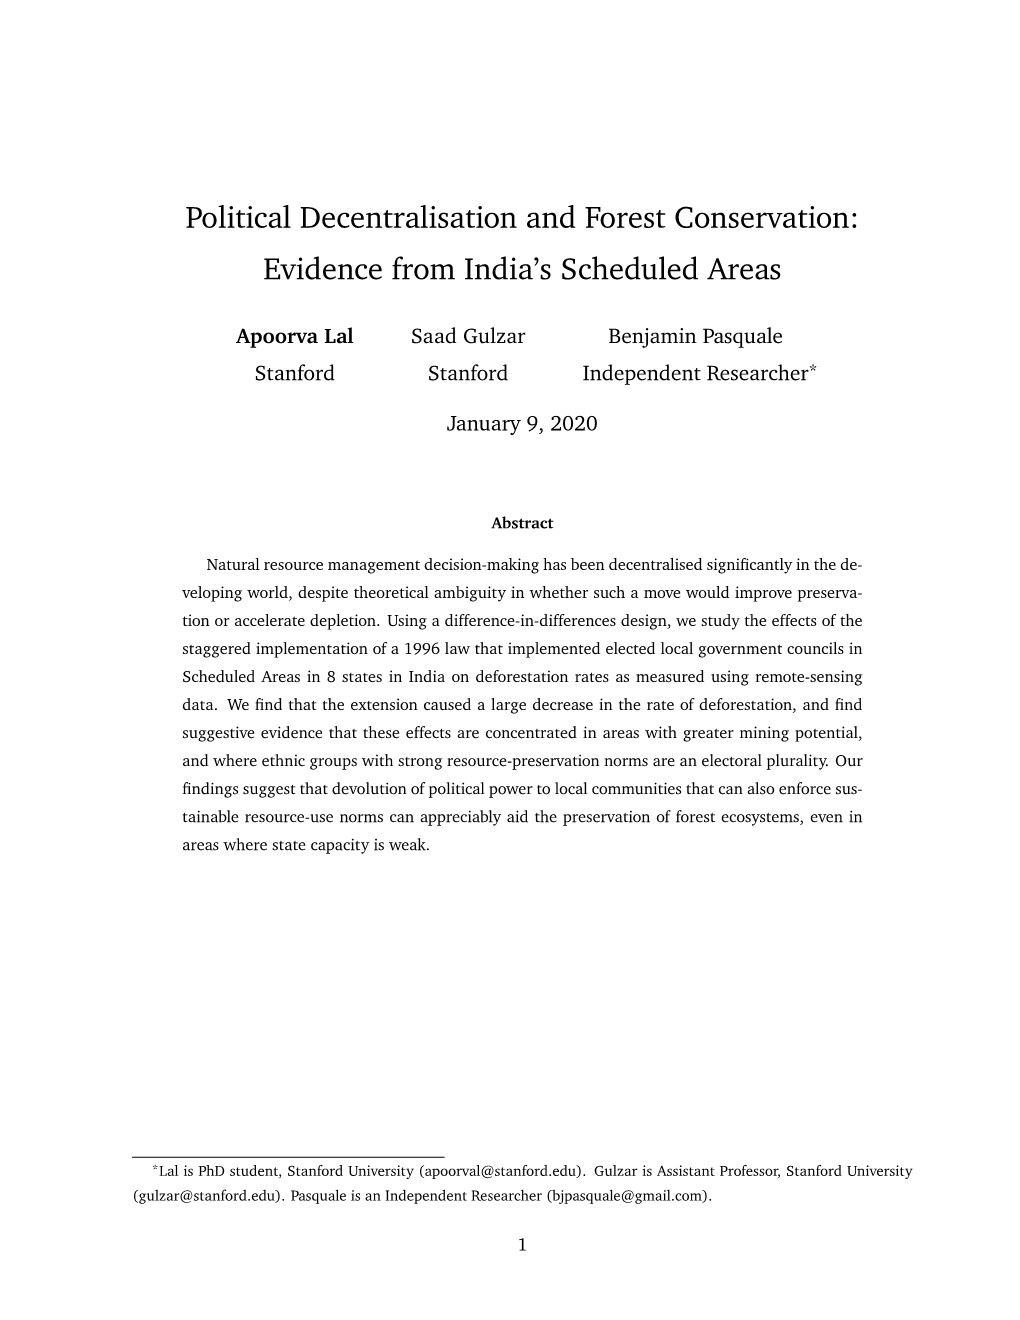 Political Decentralisation and Forest Conservation: Evidence from India's